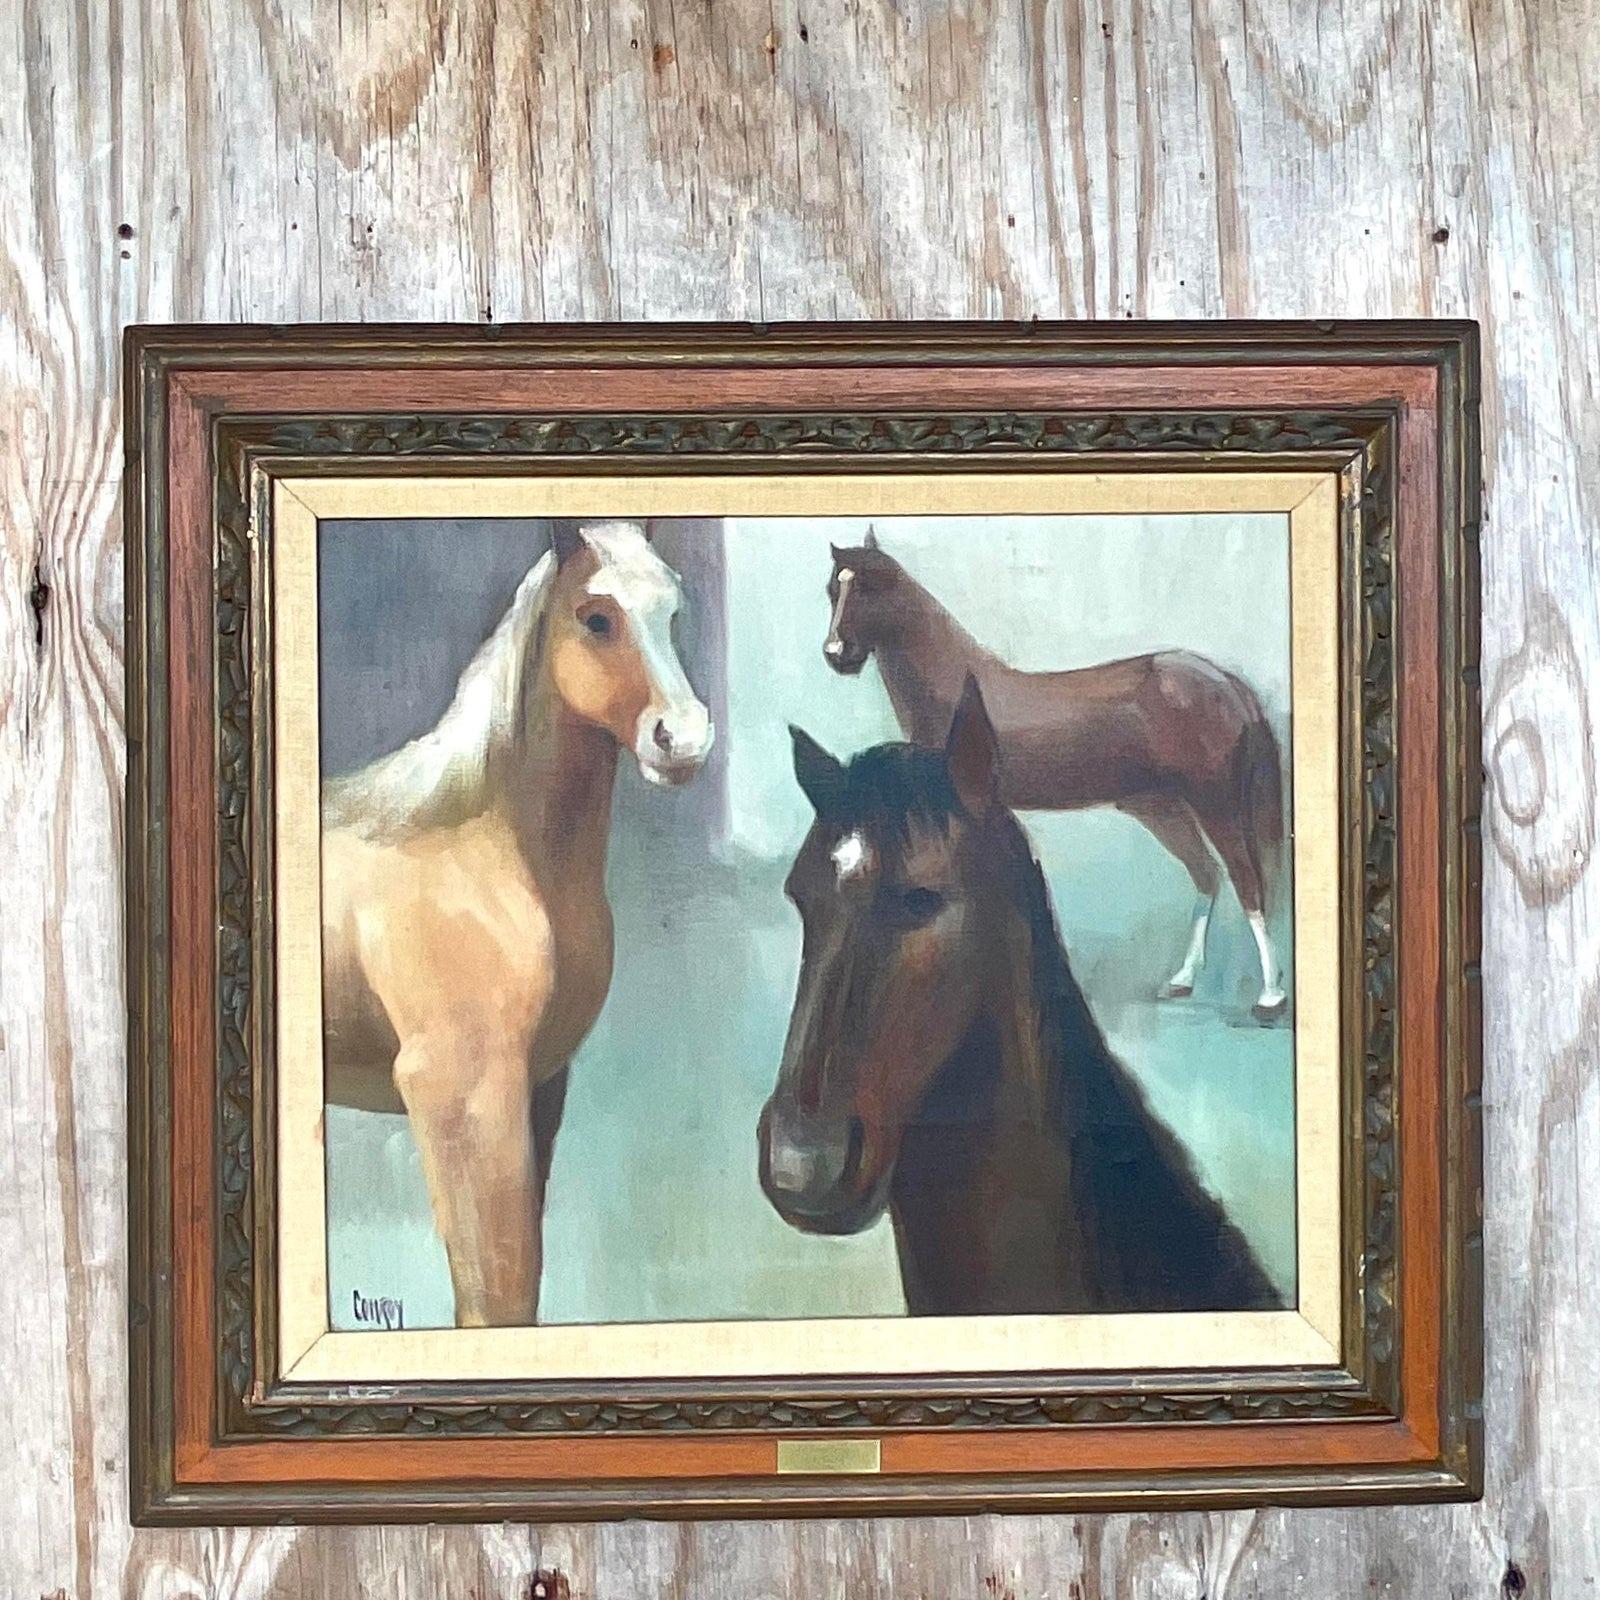 A fantastic vintage painting of horses from the American School Equestrian, signed by the artist. Acquired at a Palm Beach estate.